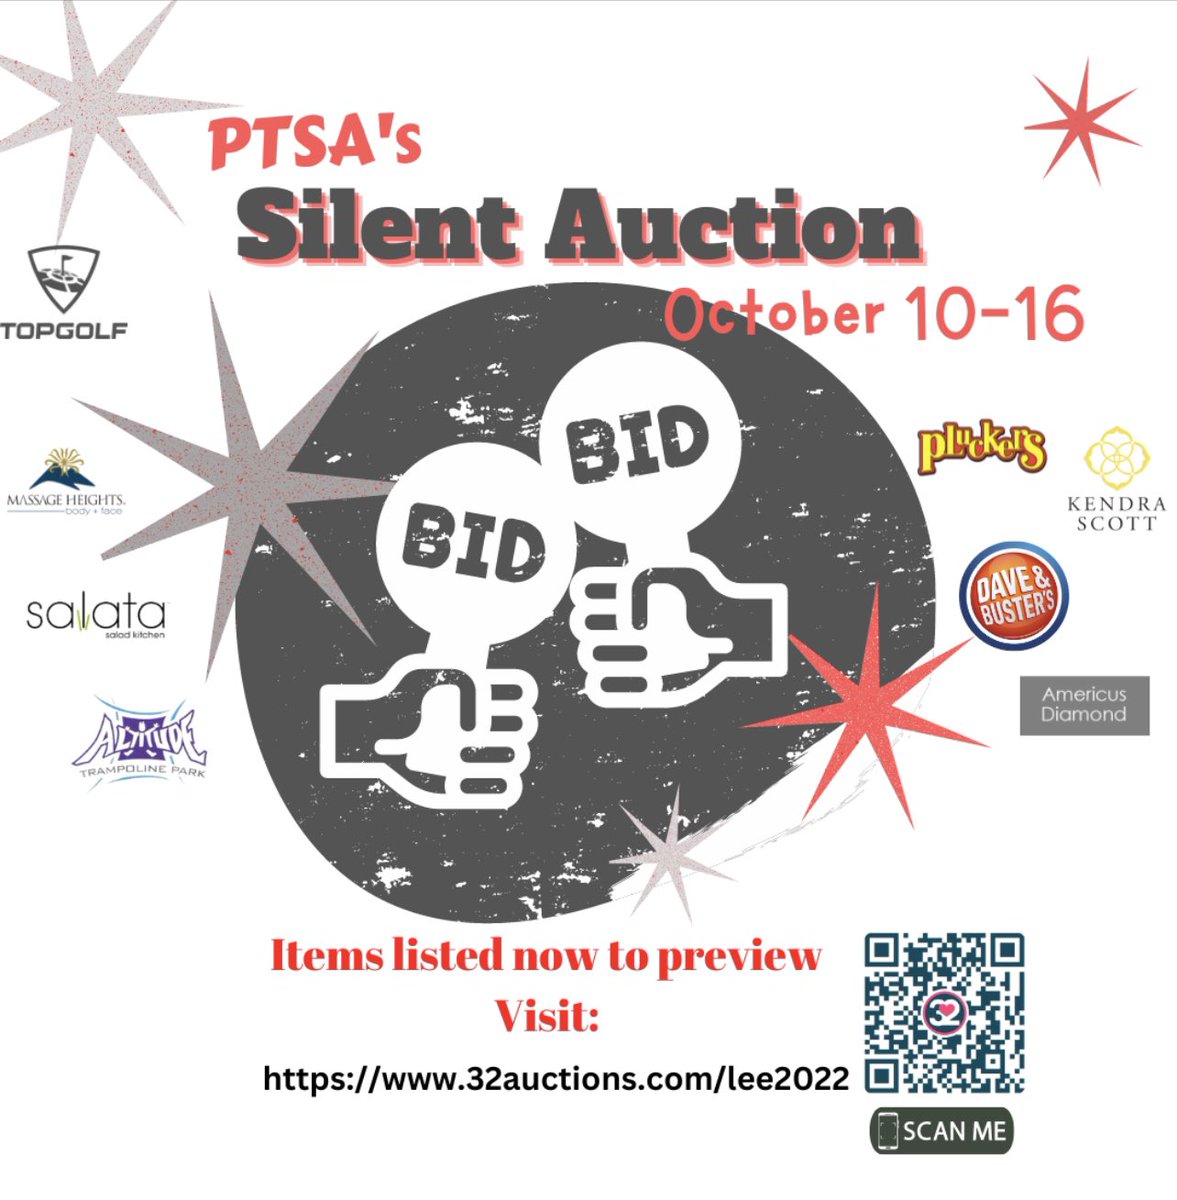 Our Silent Auction is Live. Place your Bids or Select Buy now to claim your items. 32auctions.com/lee2022